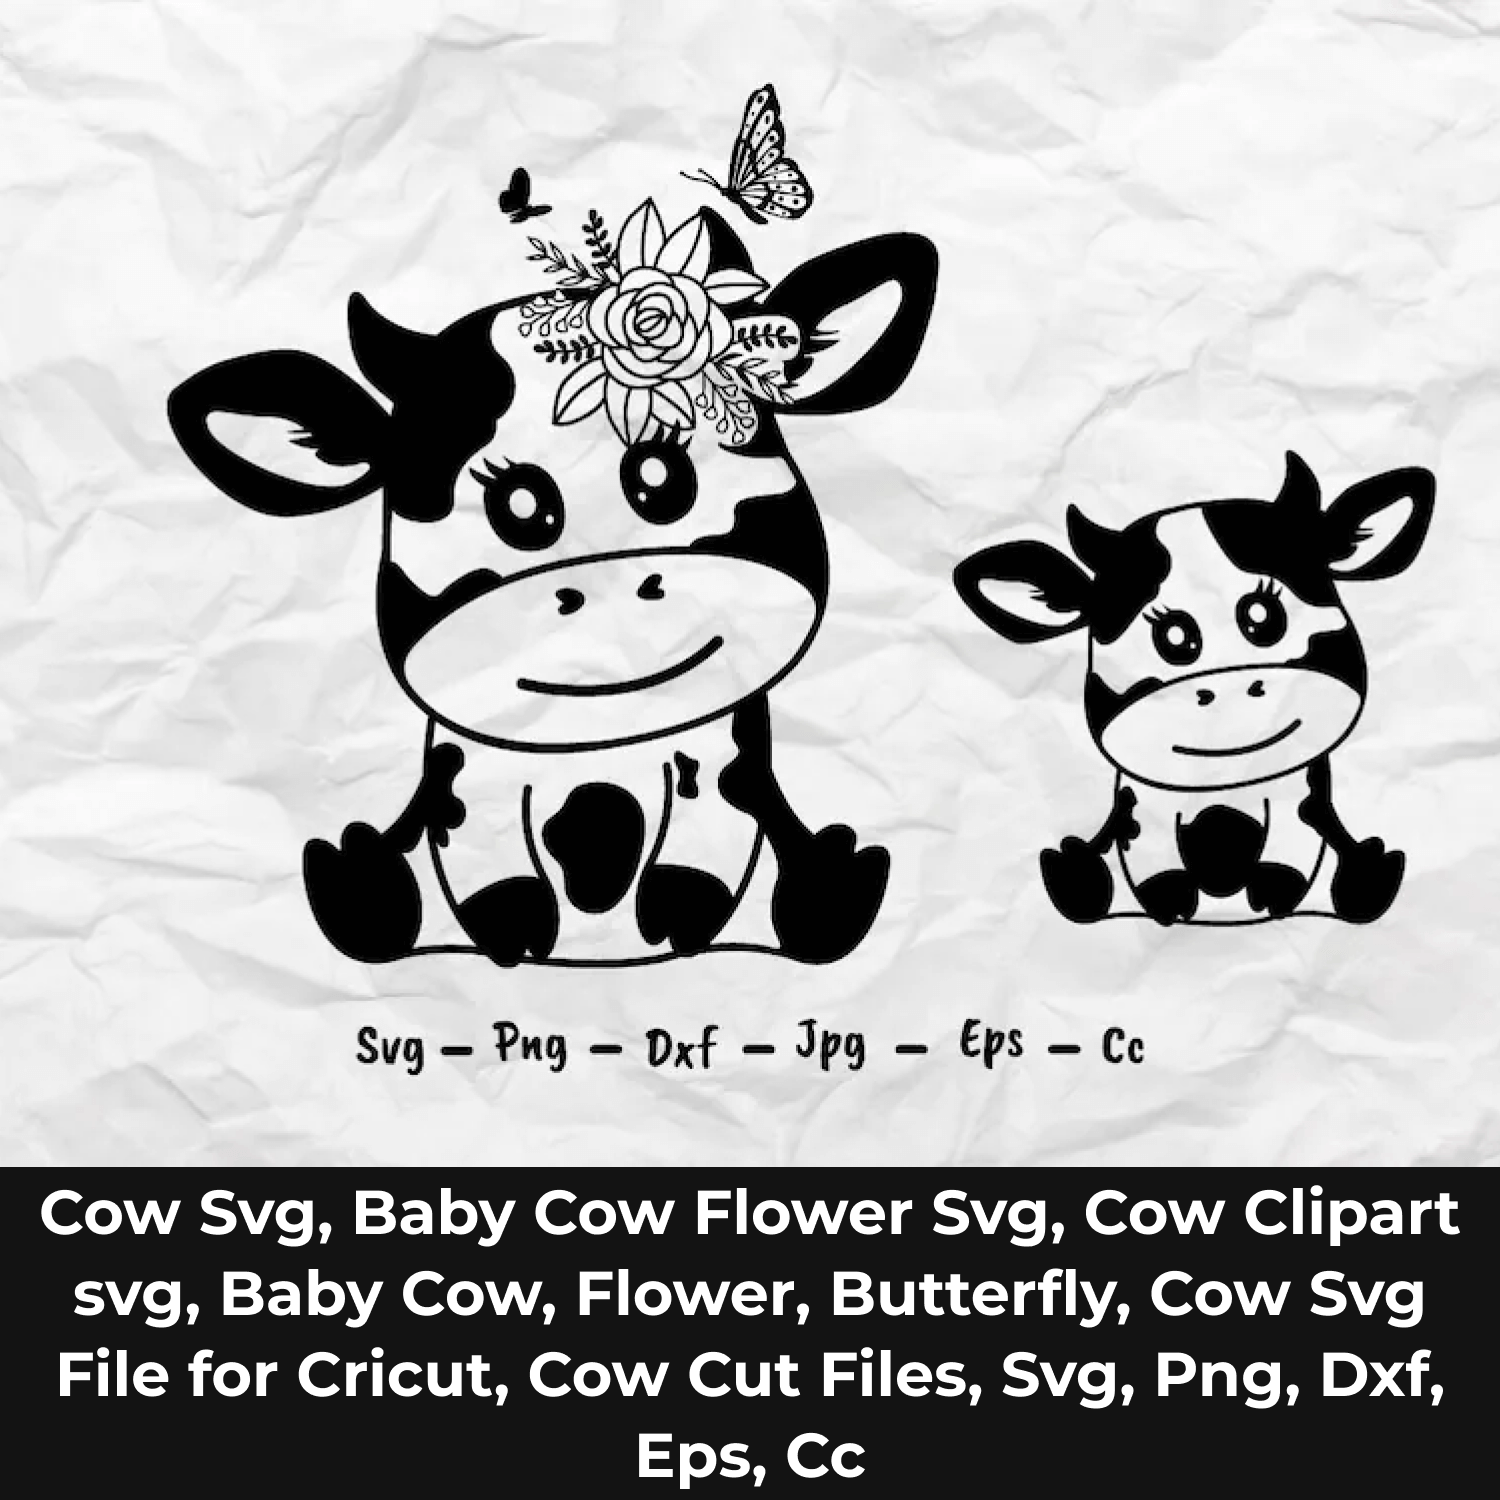 Svg cow clipart svg baby cow.